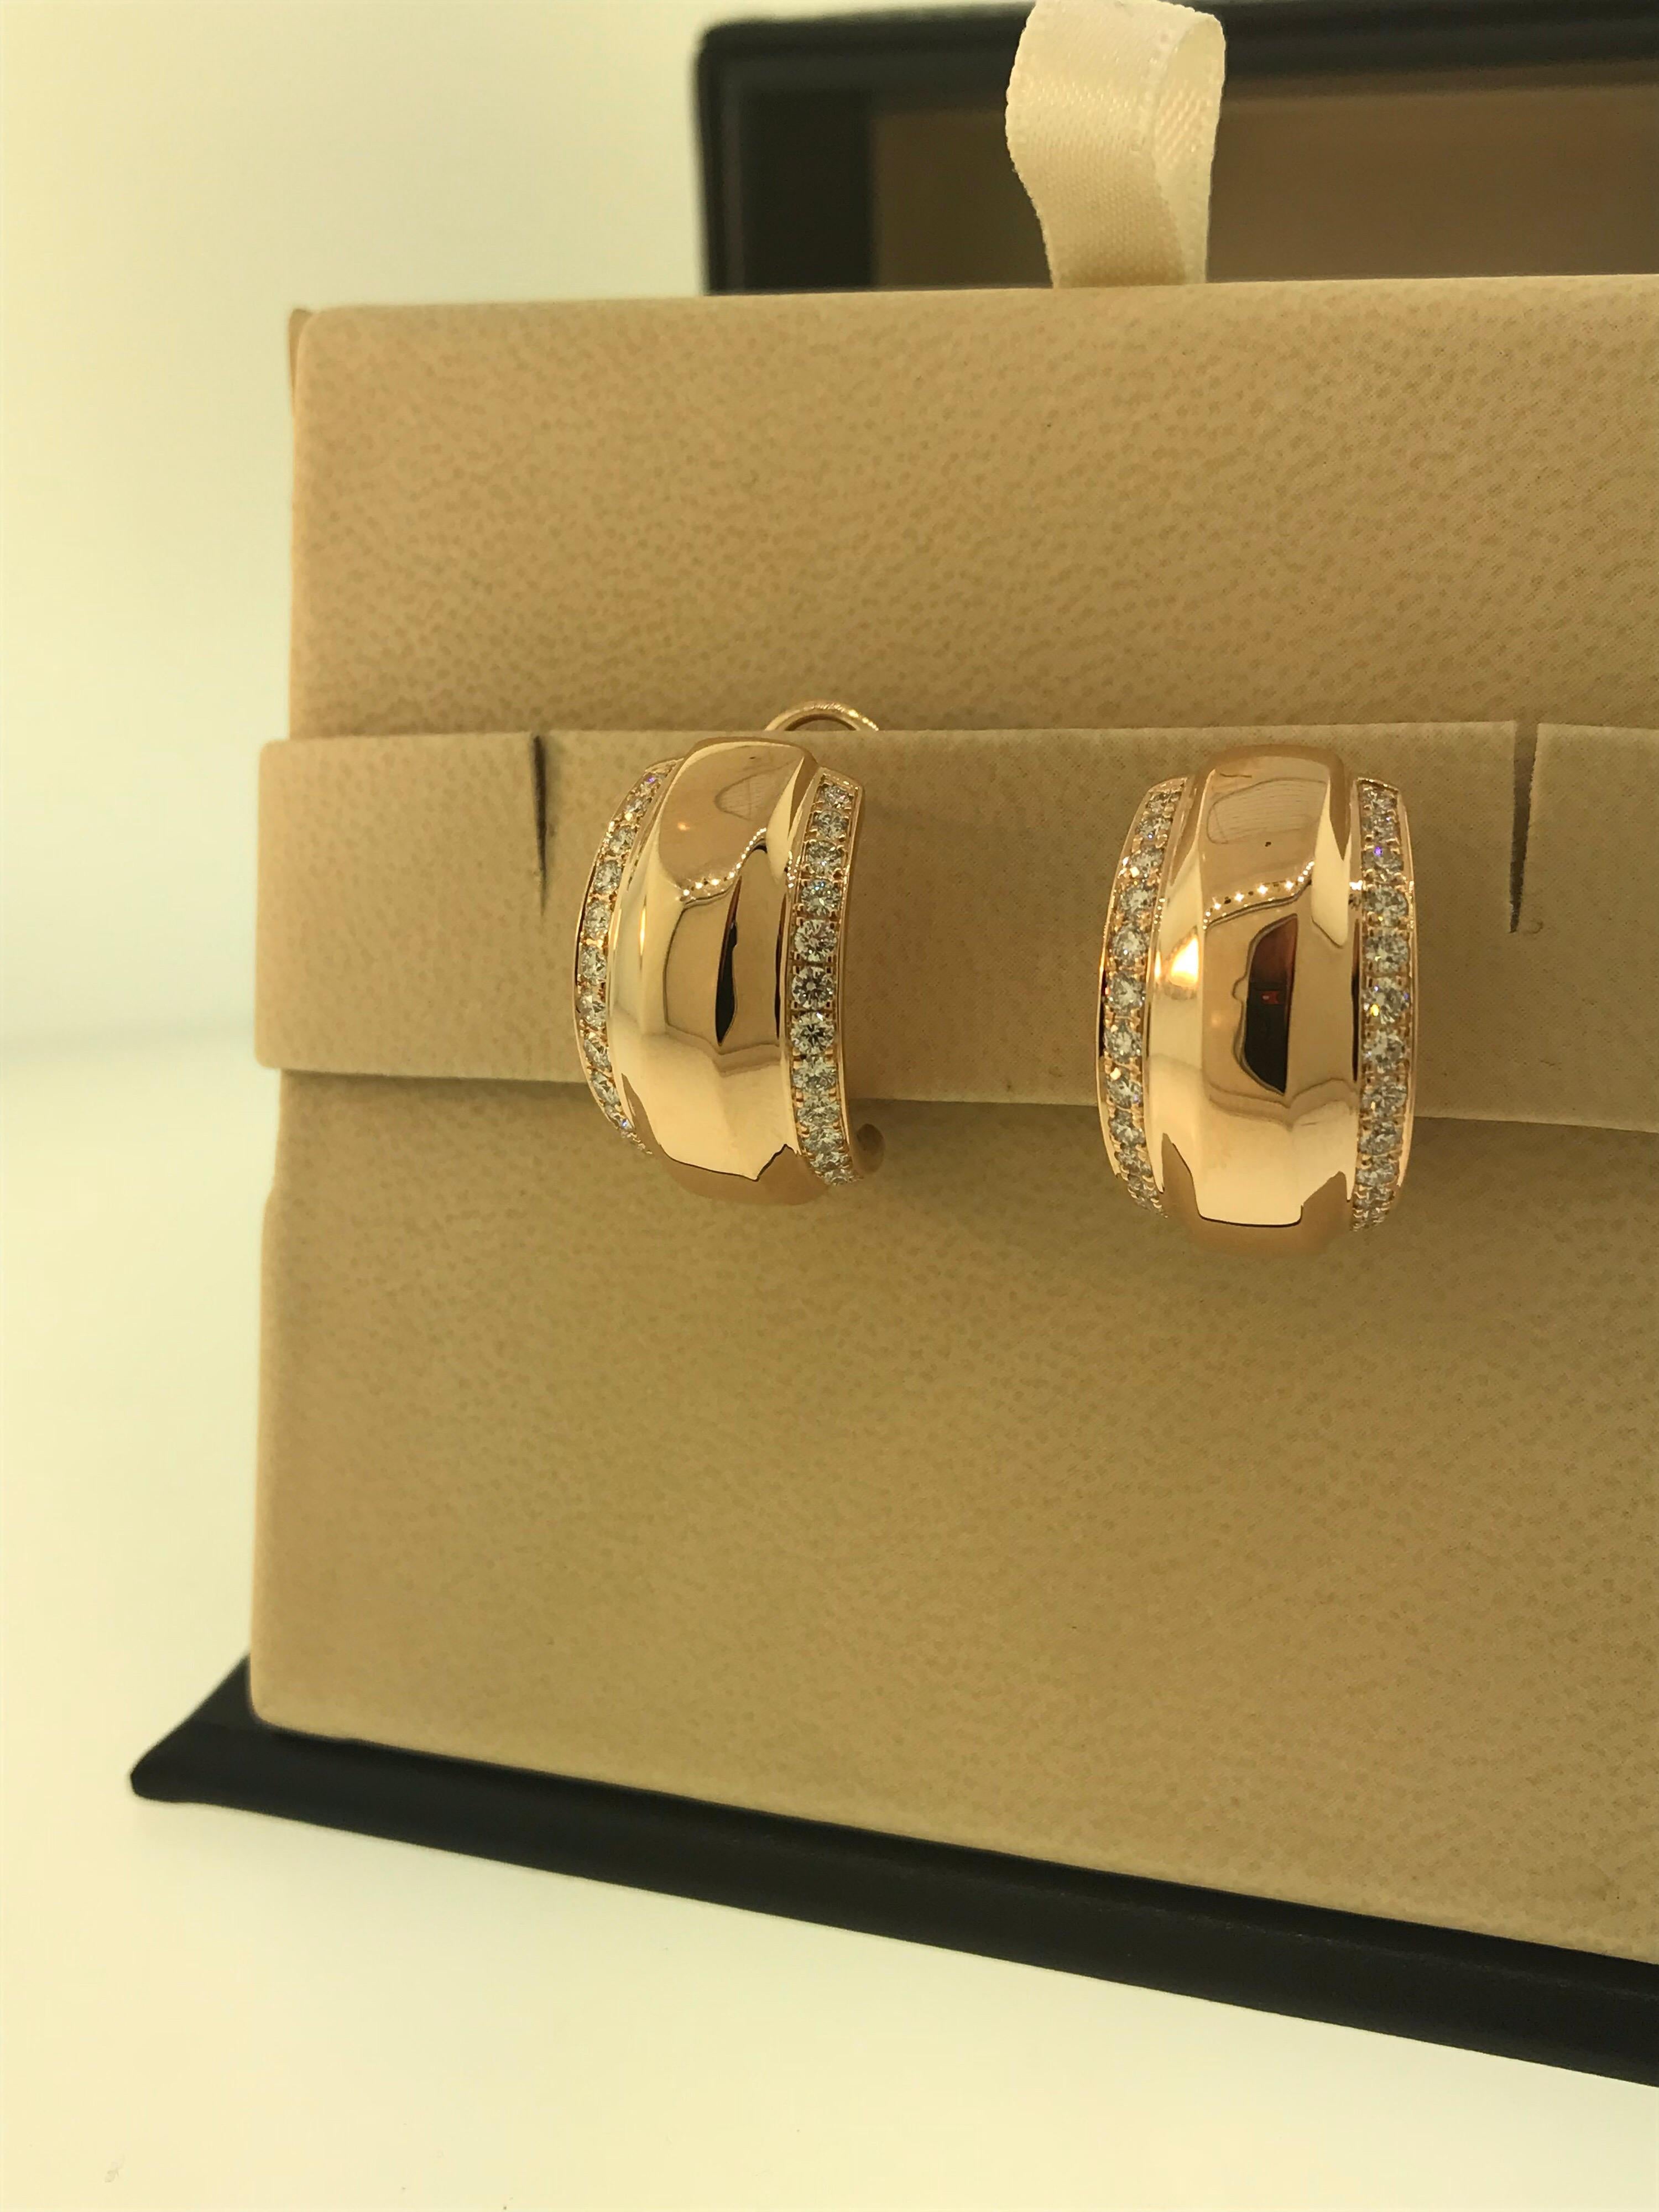 Chopard La Strada Earrings

Model Number: 84/9402-5001

100% Authentic

Brand New

Comes with original Chopard box, certificate of authenticity and warranty and jewels manual

18 Karat Rose Gold

60 Diamonds on the Earrings (1.39 Carats)

Earrings